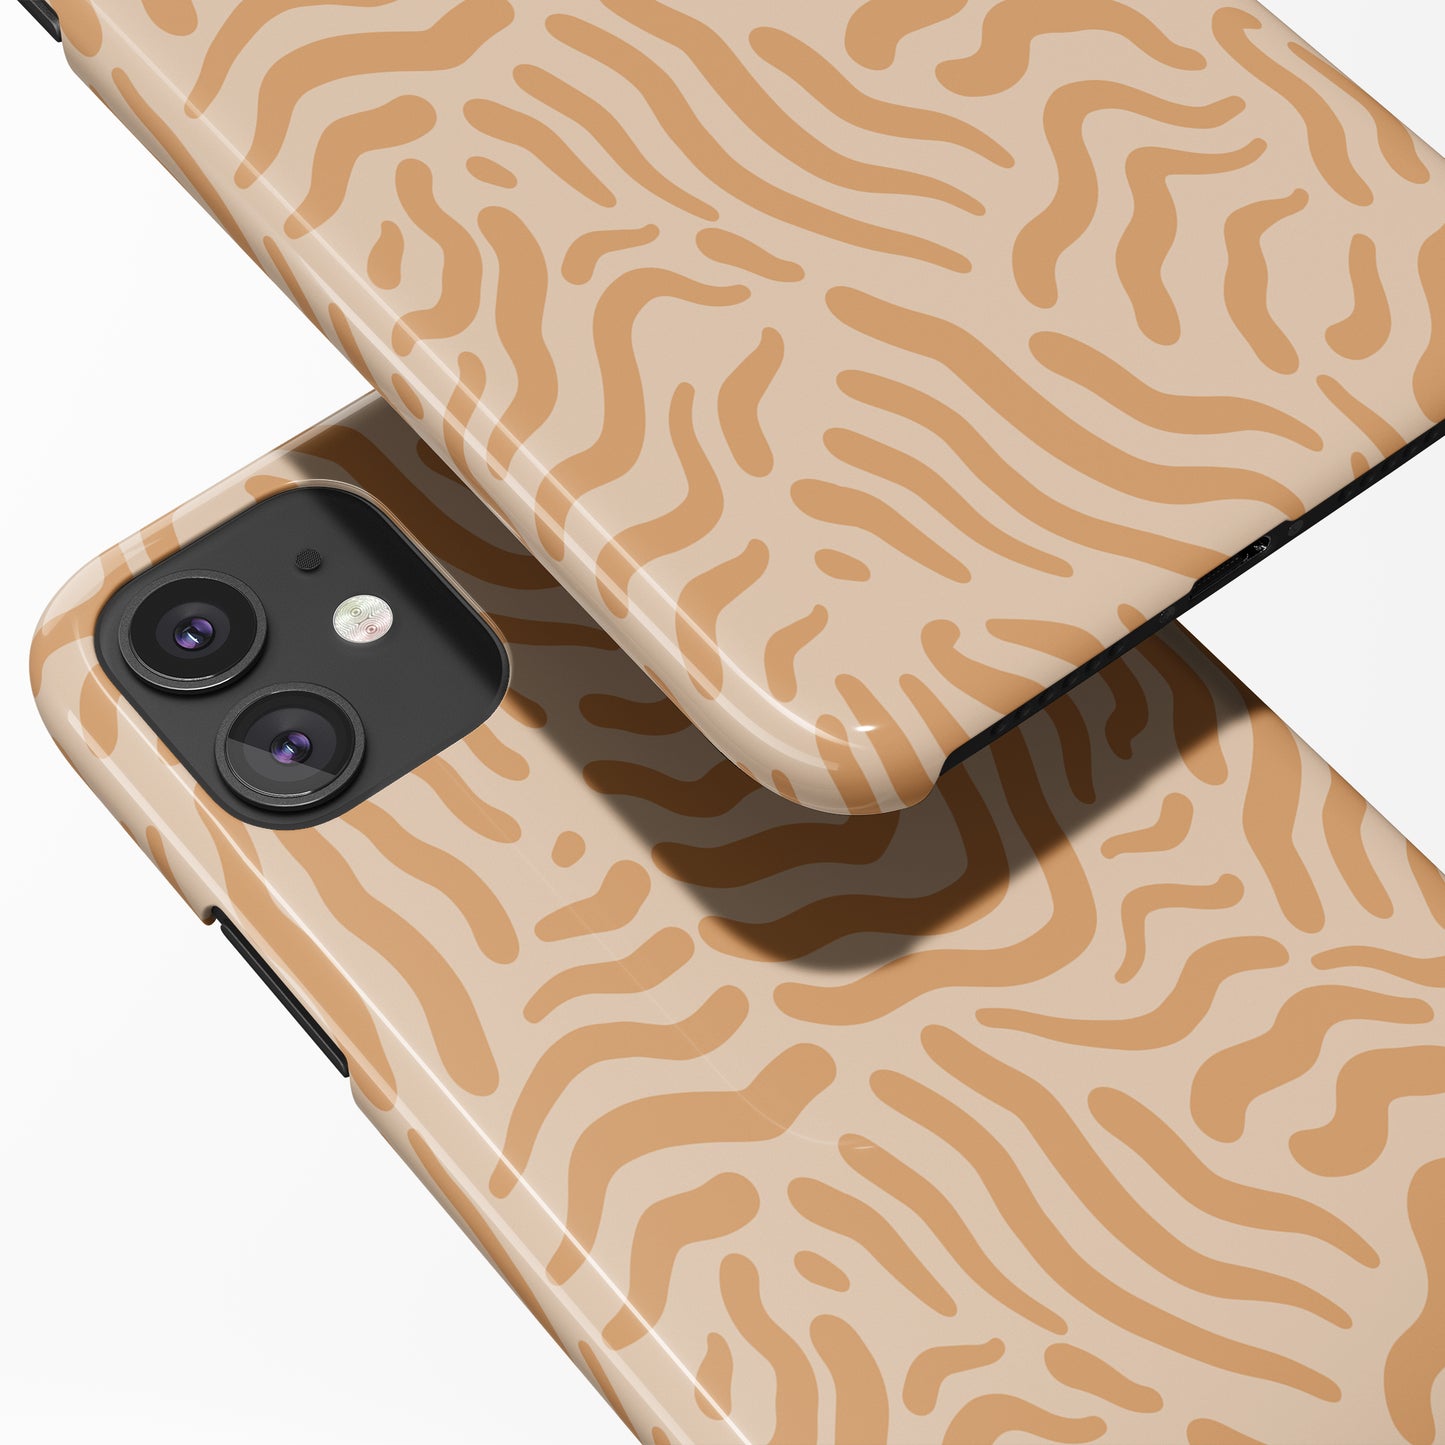 iPhone Case with Abstract Shapes